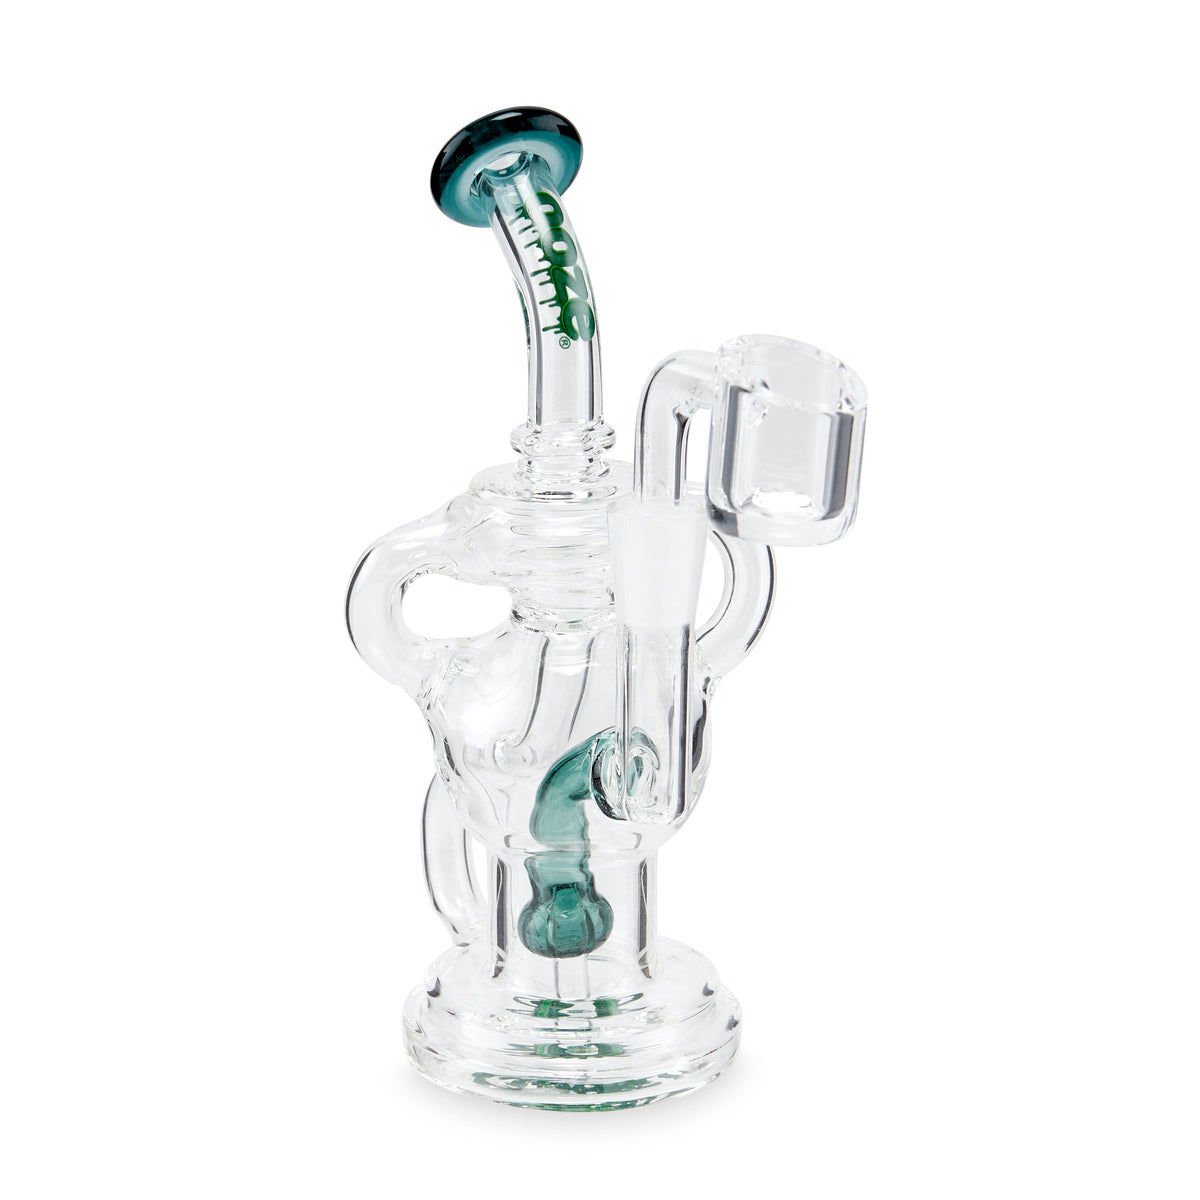 Ooze Swell Mini Recycler Dab Rig Kit